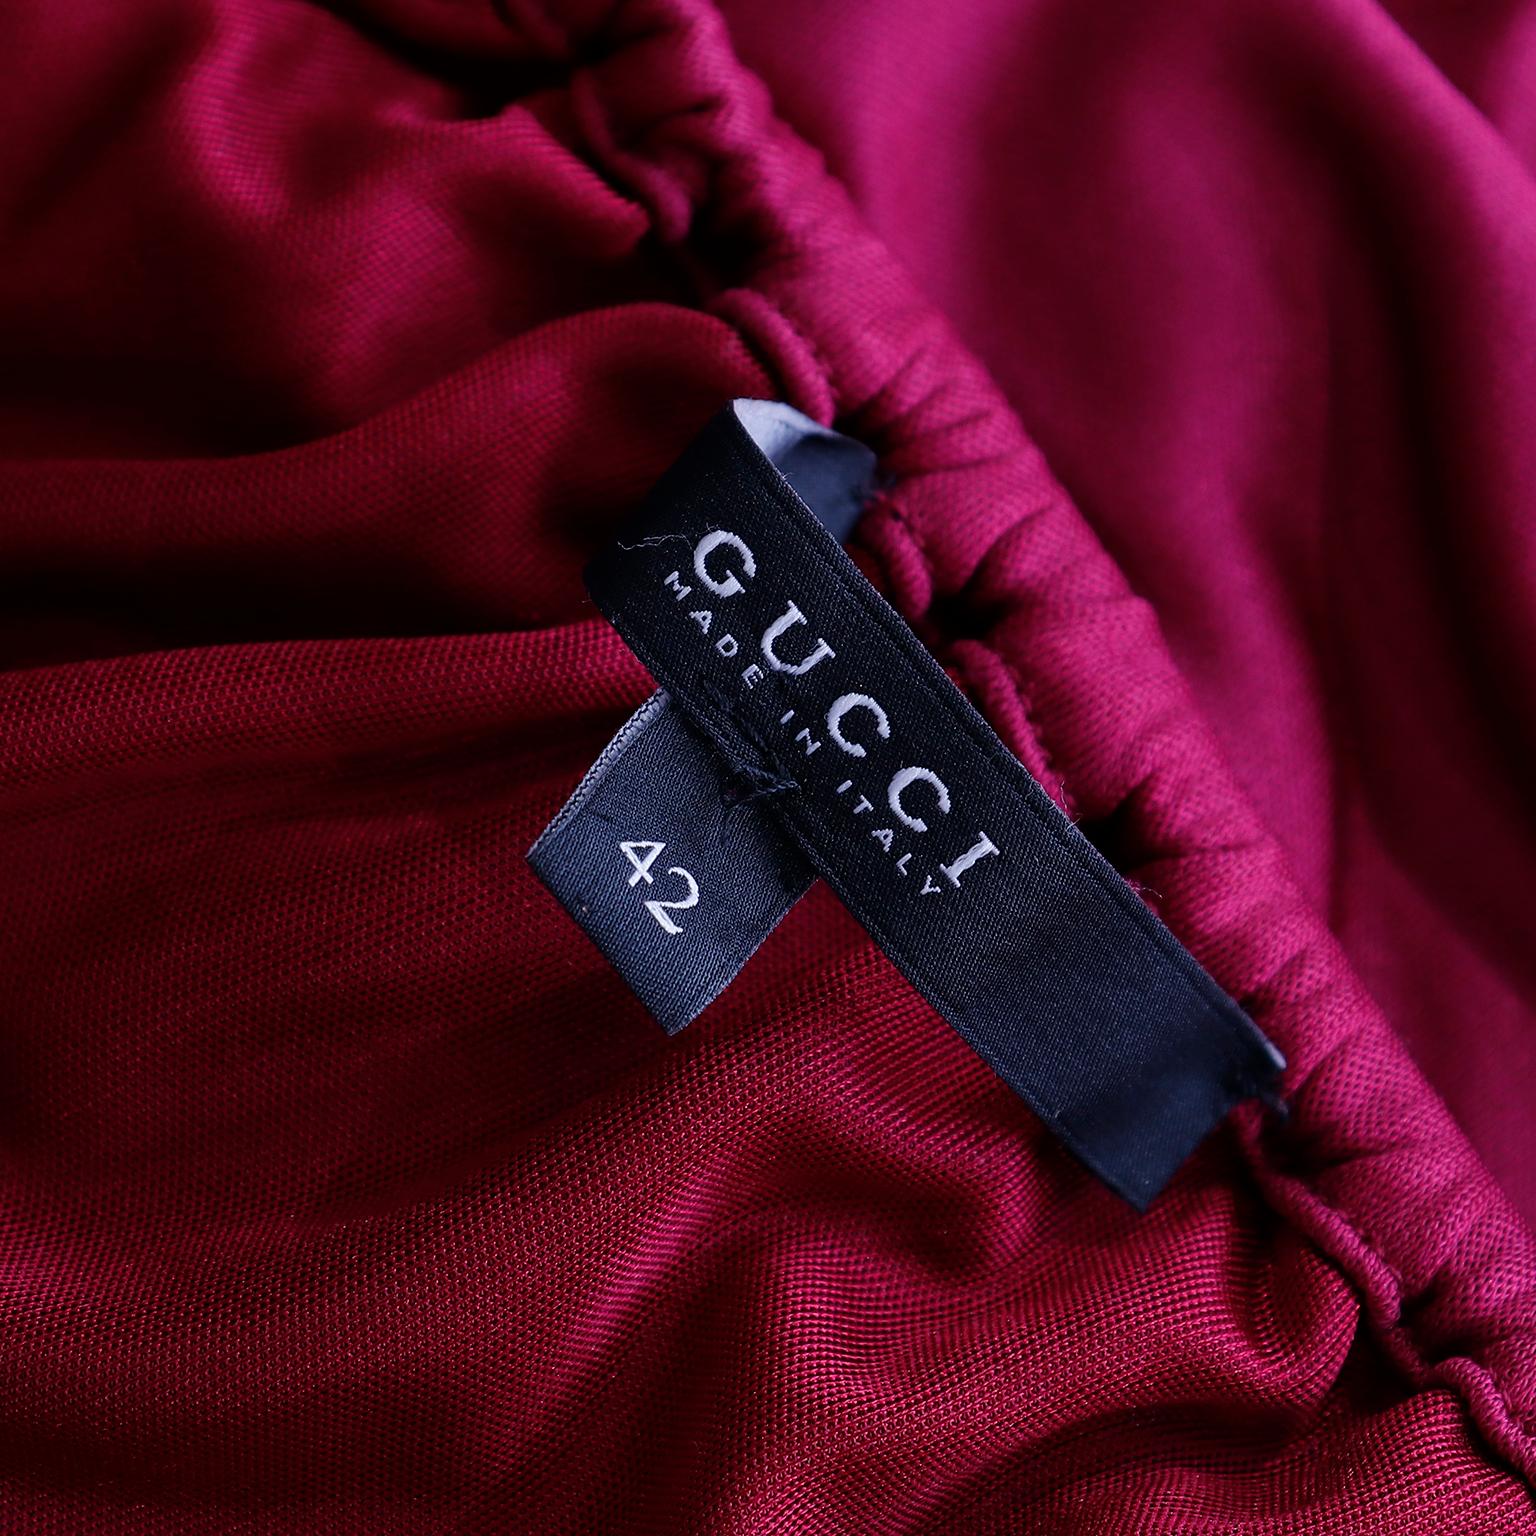 Gucci Burgundy Low Cut Top with Sash and Gold GG Logo & Anchor Charms 8